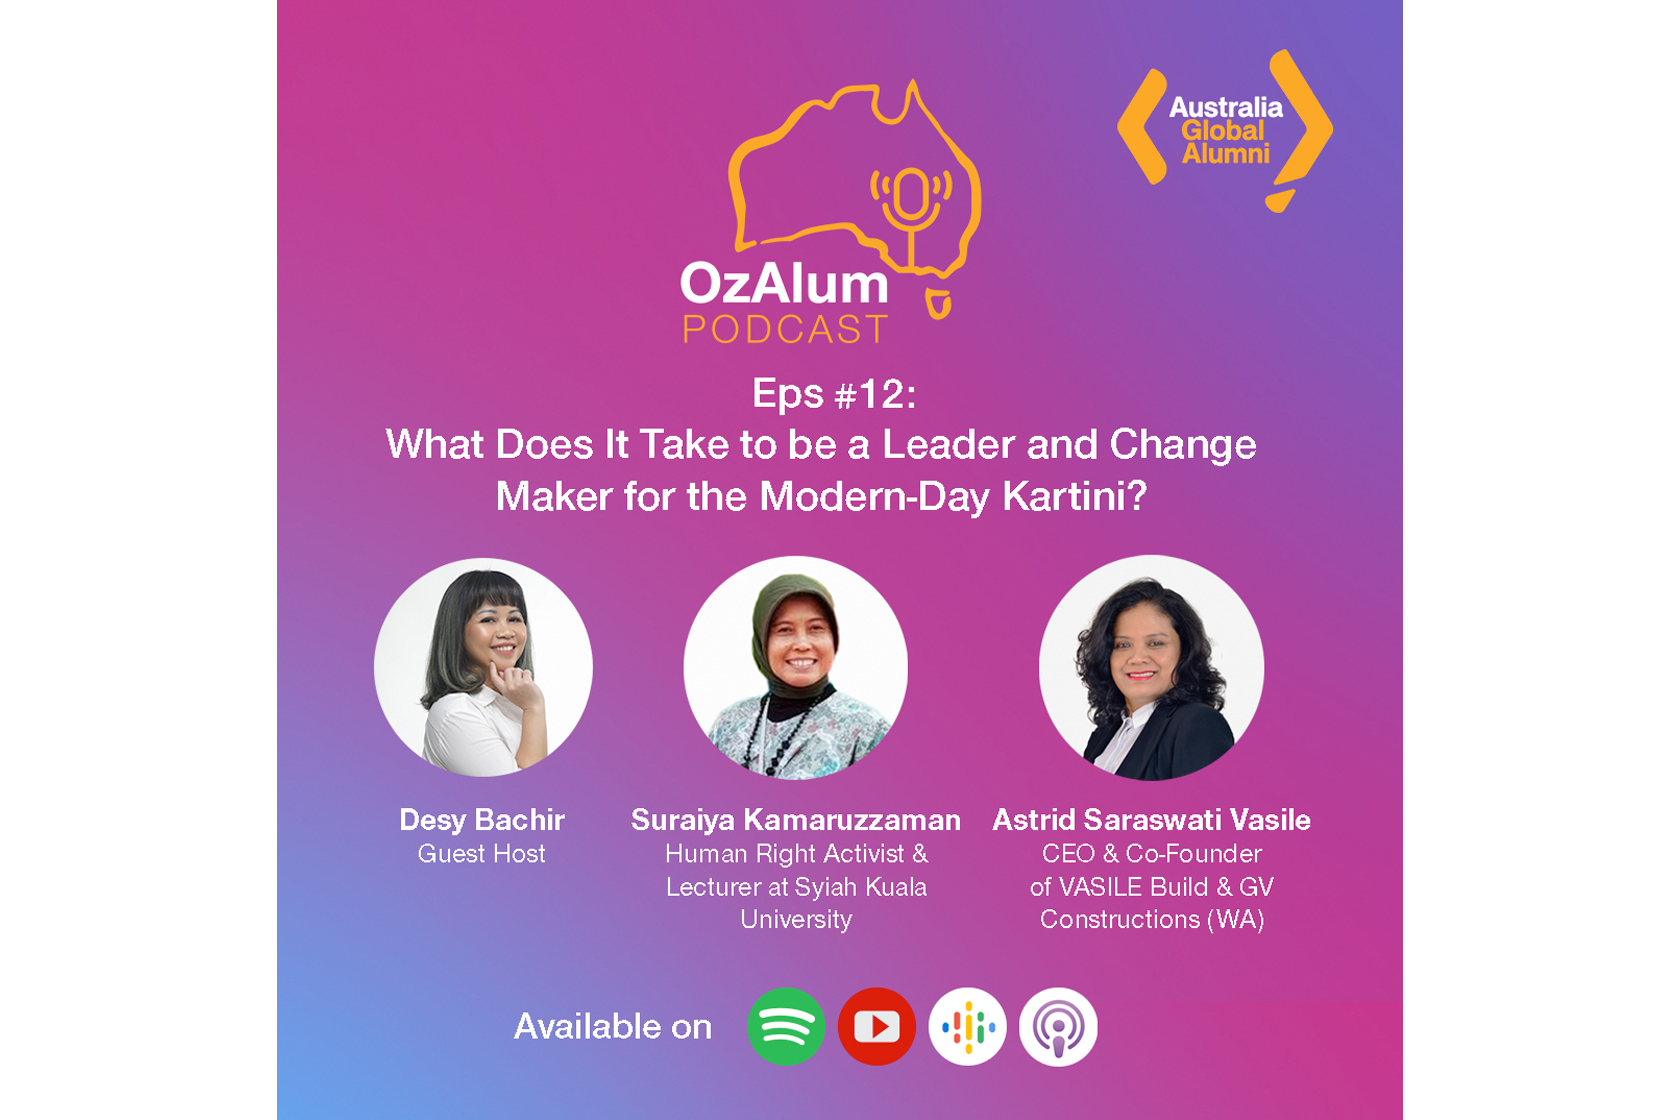 OzAlum Podcast Eps #12: What Does It Take to be a Leader & Change Maker for the Modern-Day Kartini?